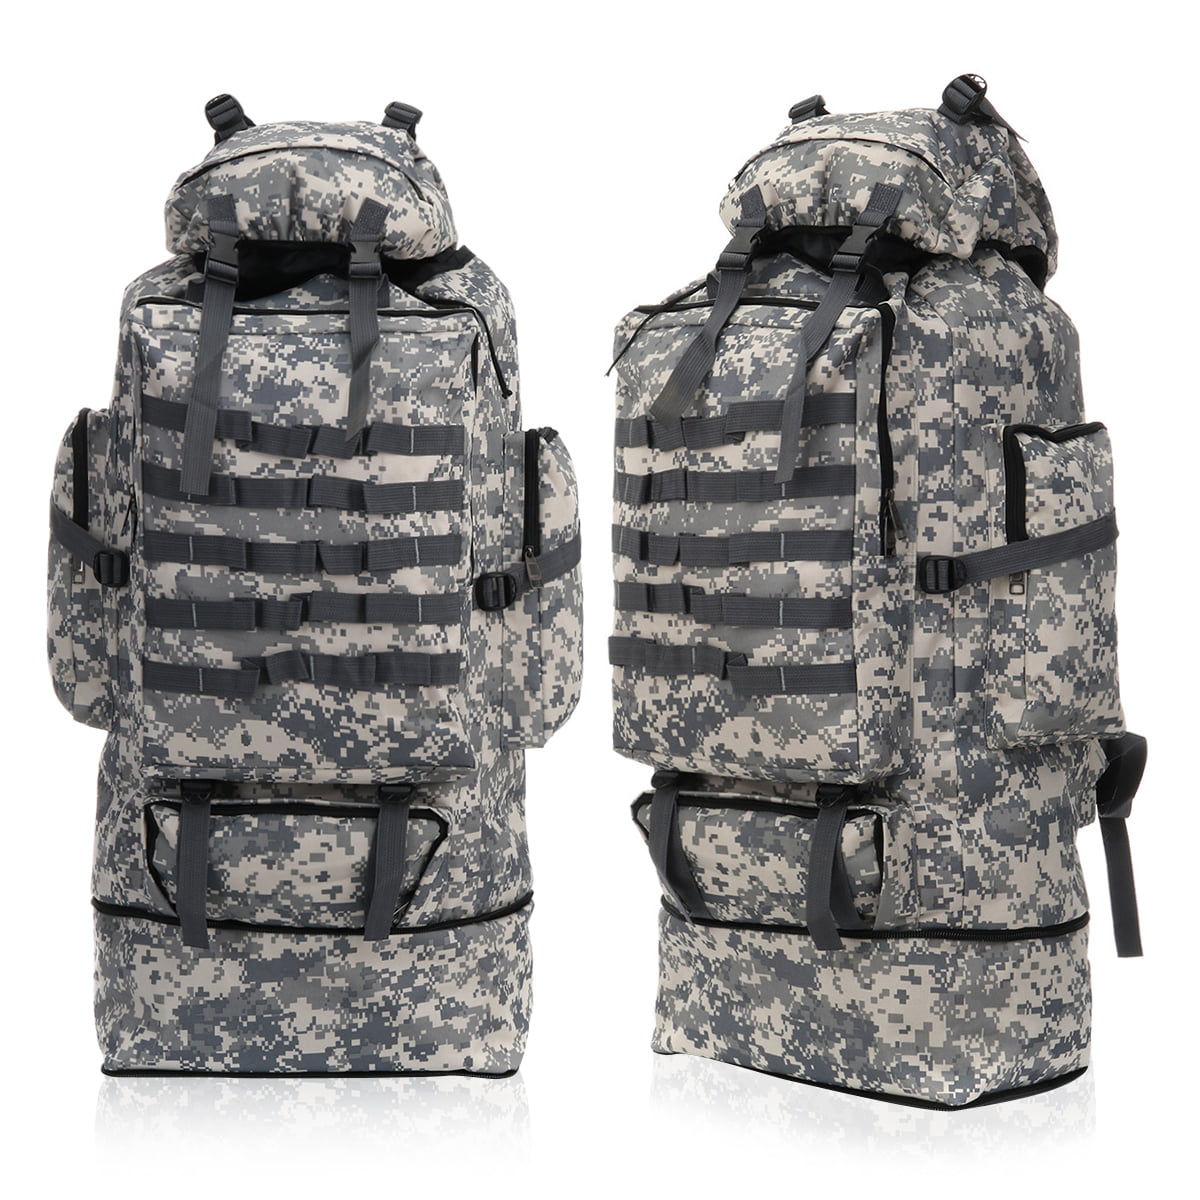 Waterproof Camping Backpack Tactical Military Outdoor Sports Rucksack Hiking 